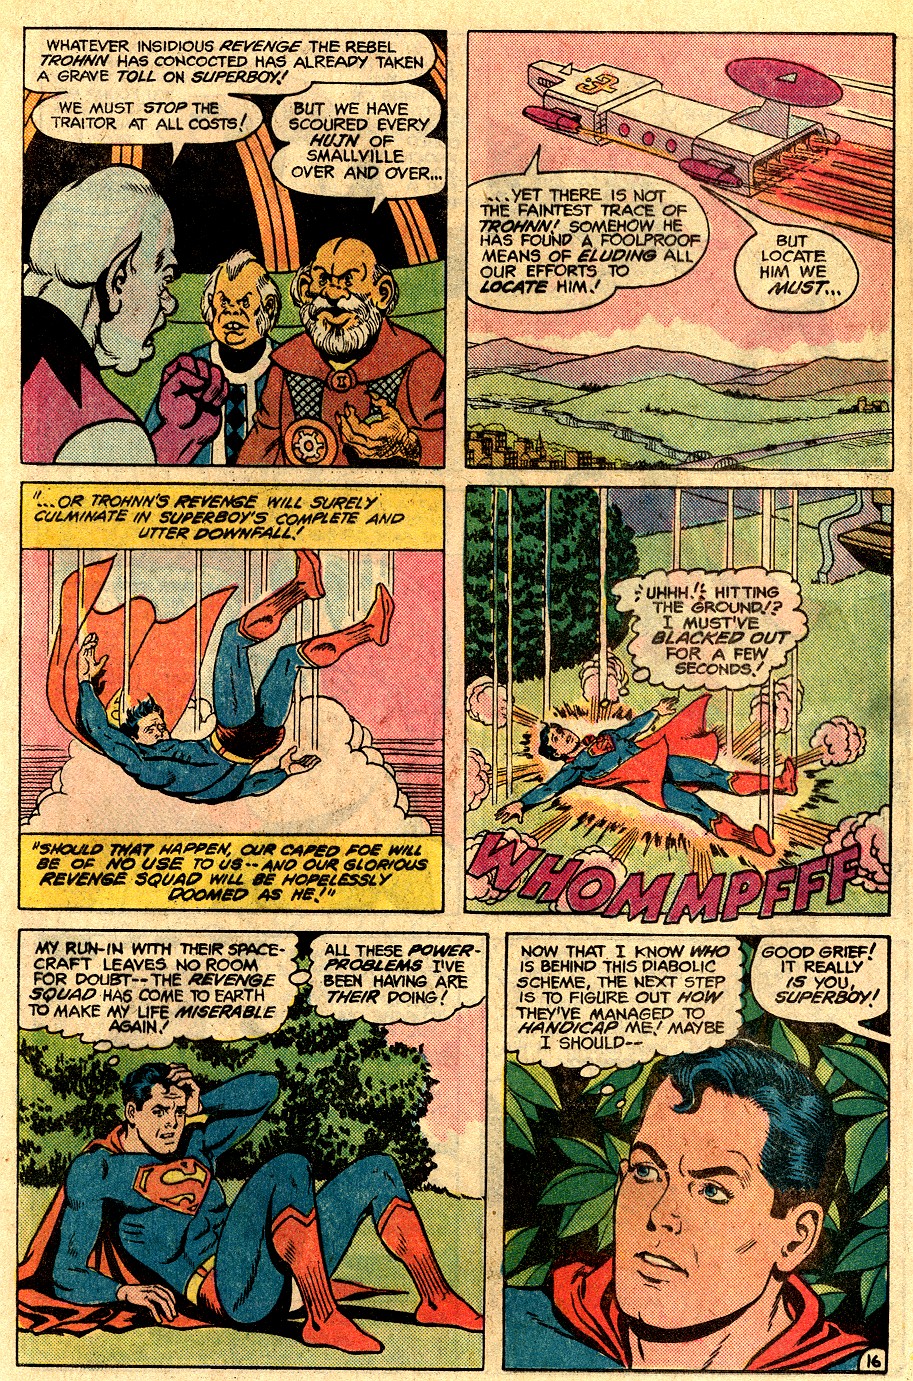 The New Adventures of Superboy 32 Page 20